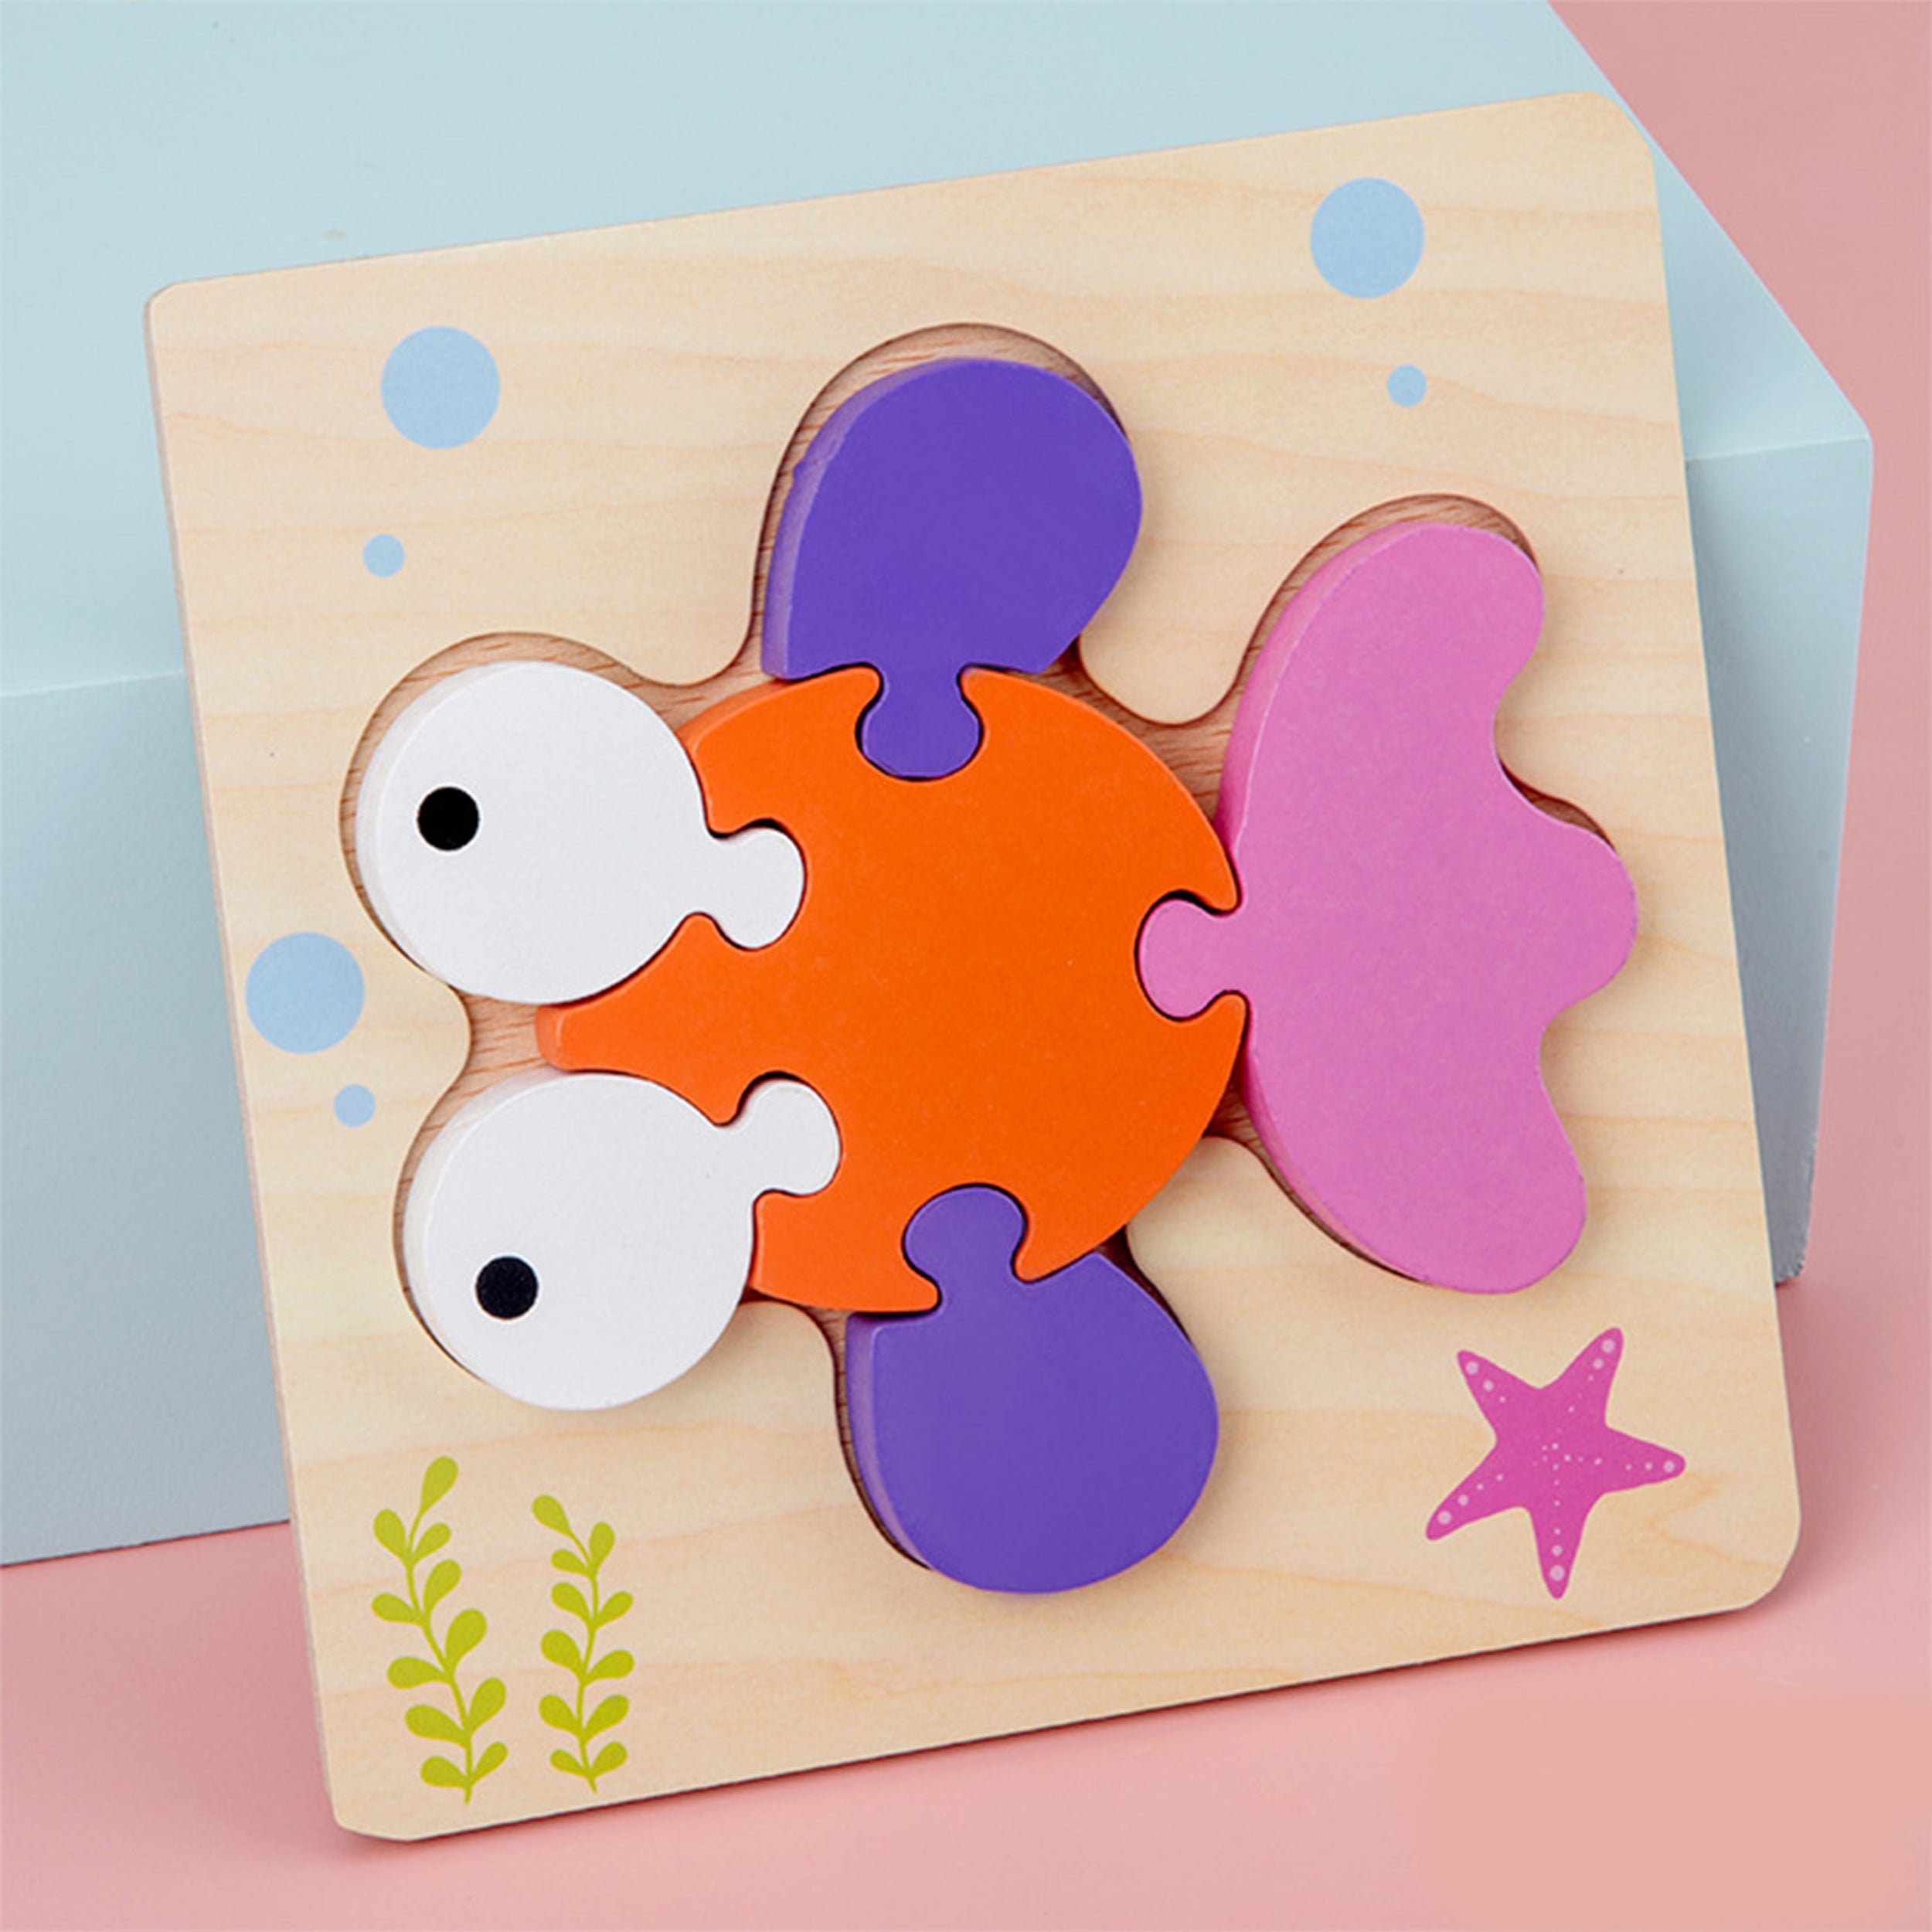 Wooden Jigsaw Puzzle for Kids - Assorted